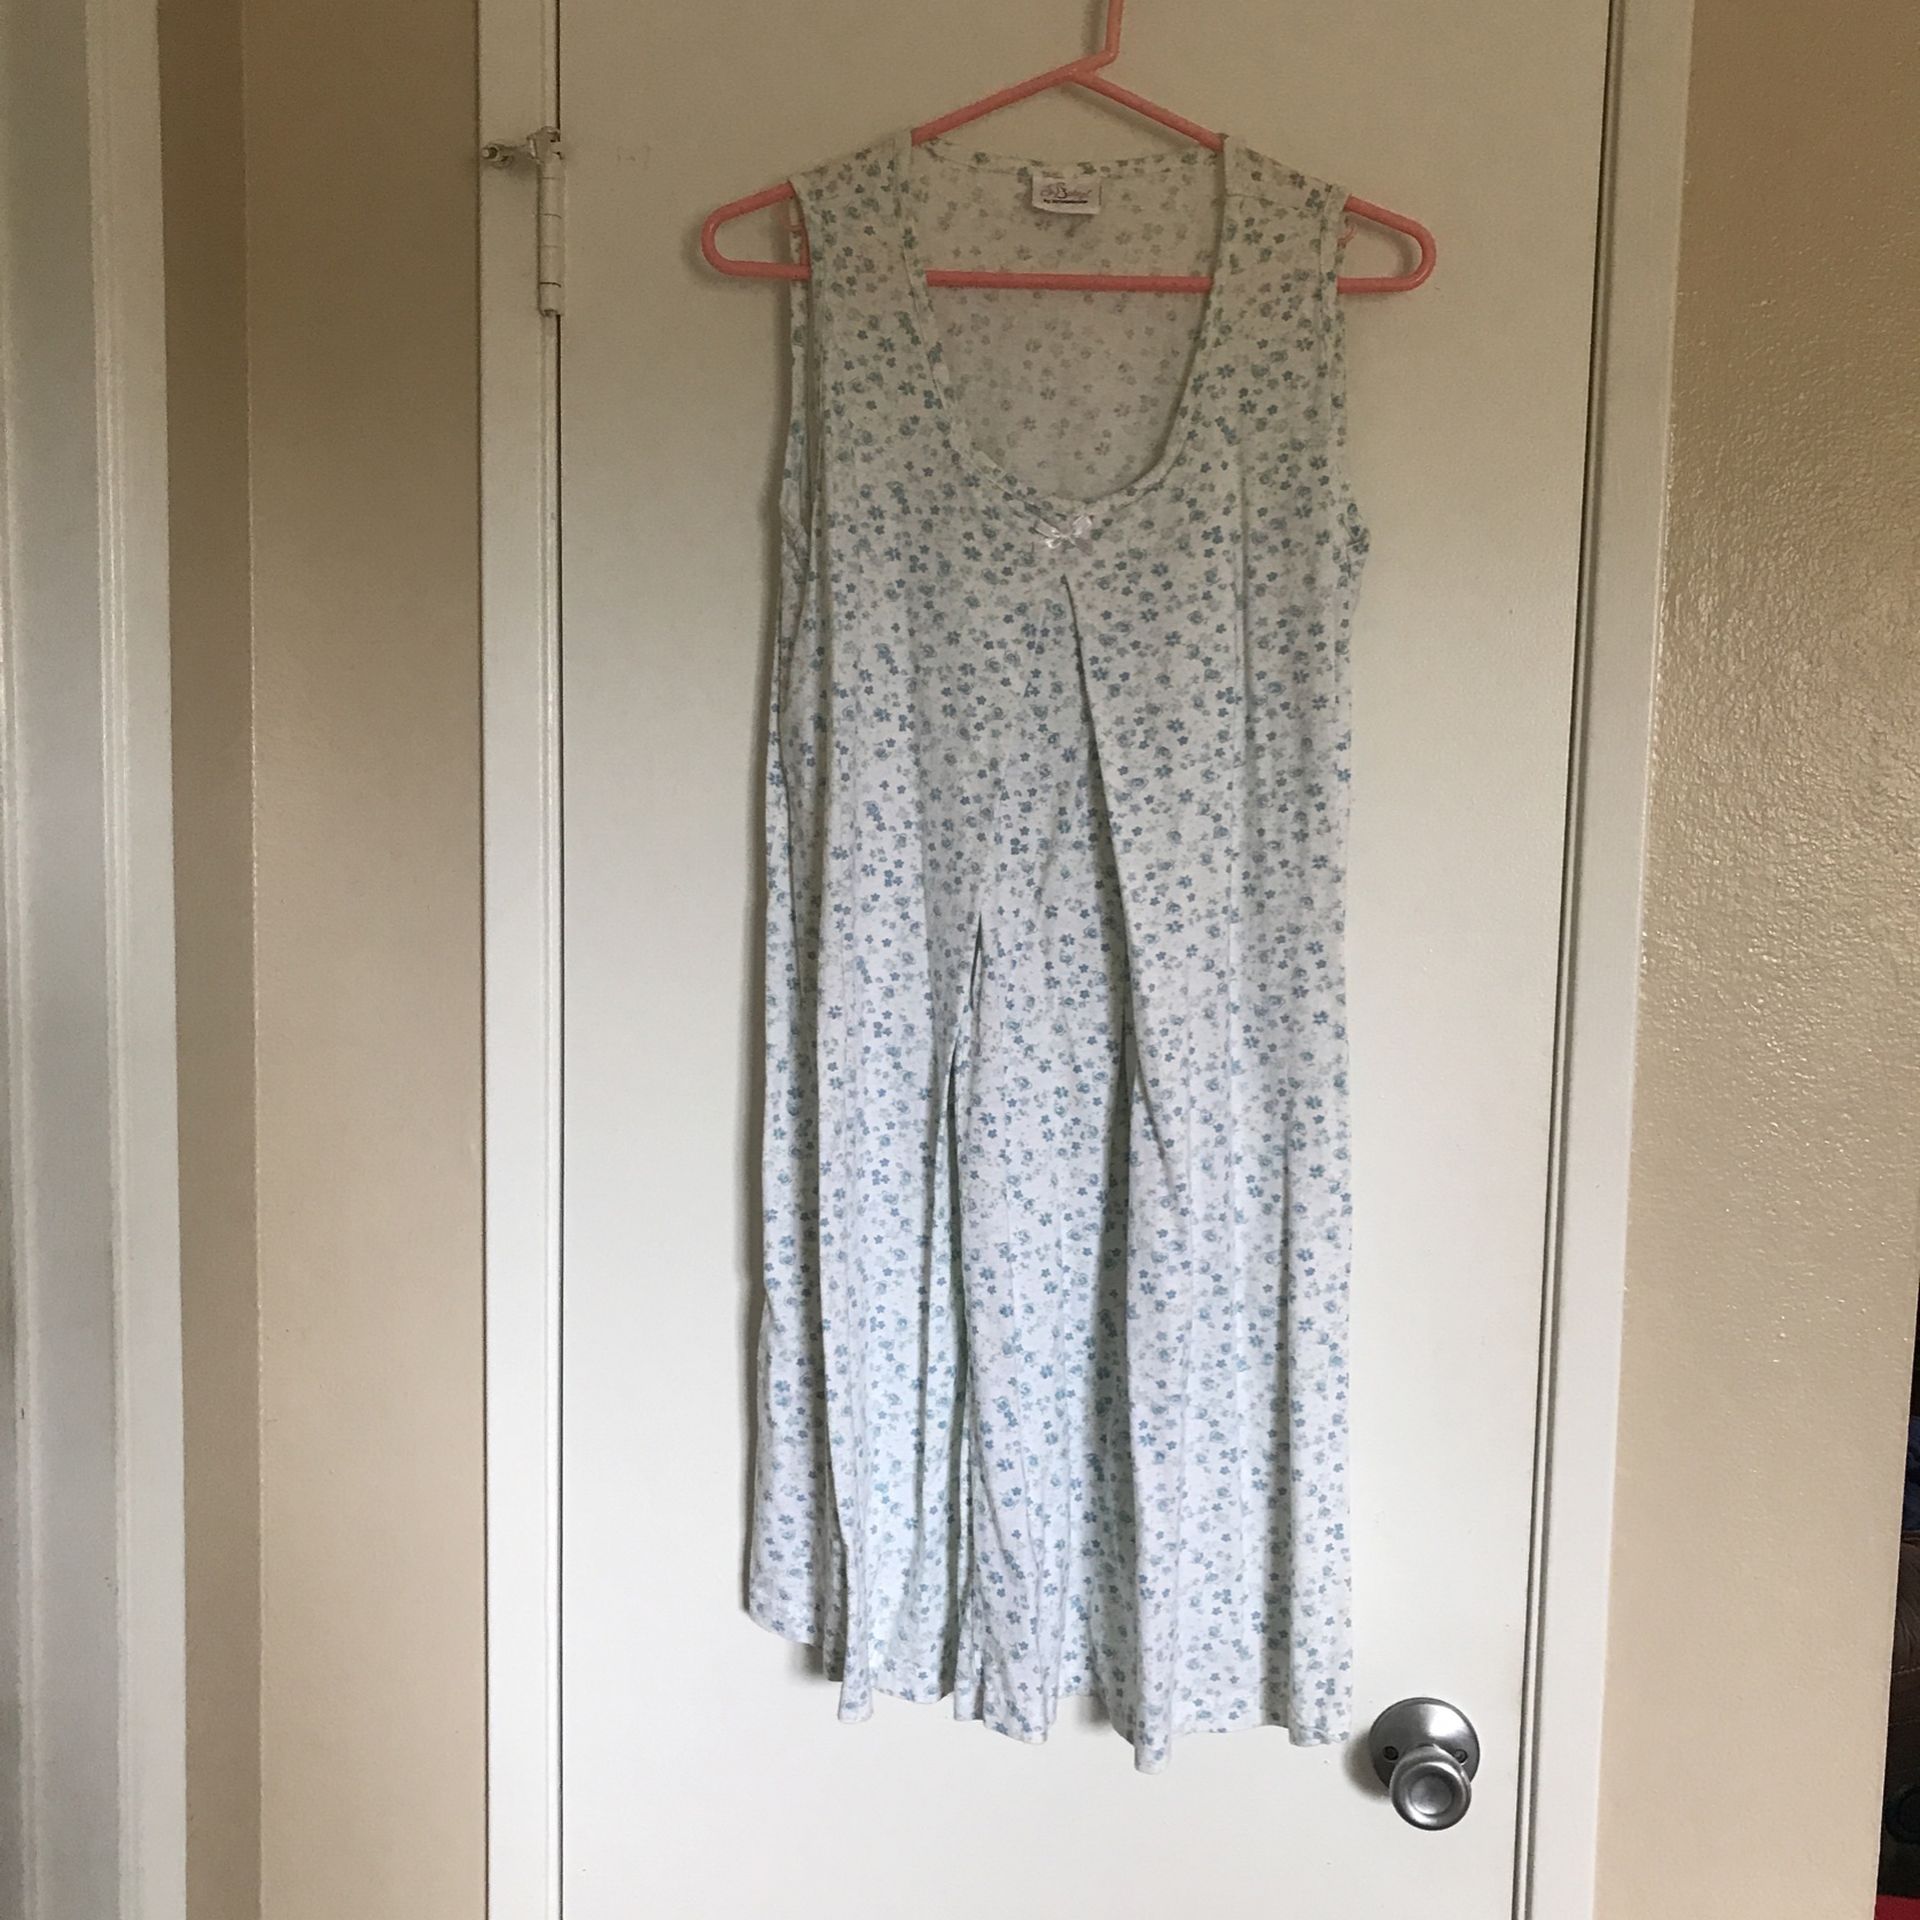 Maternity Nightgown